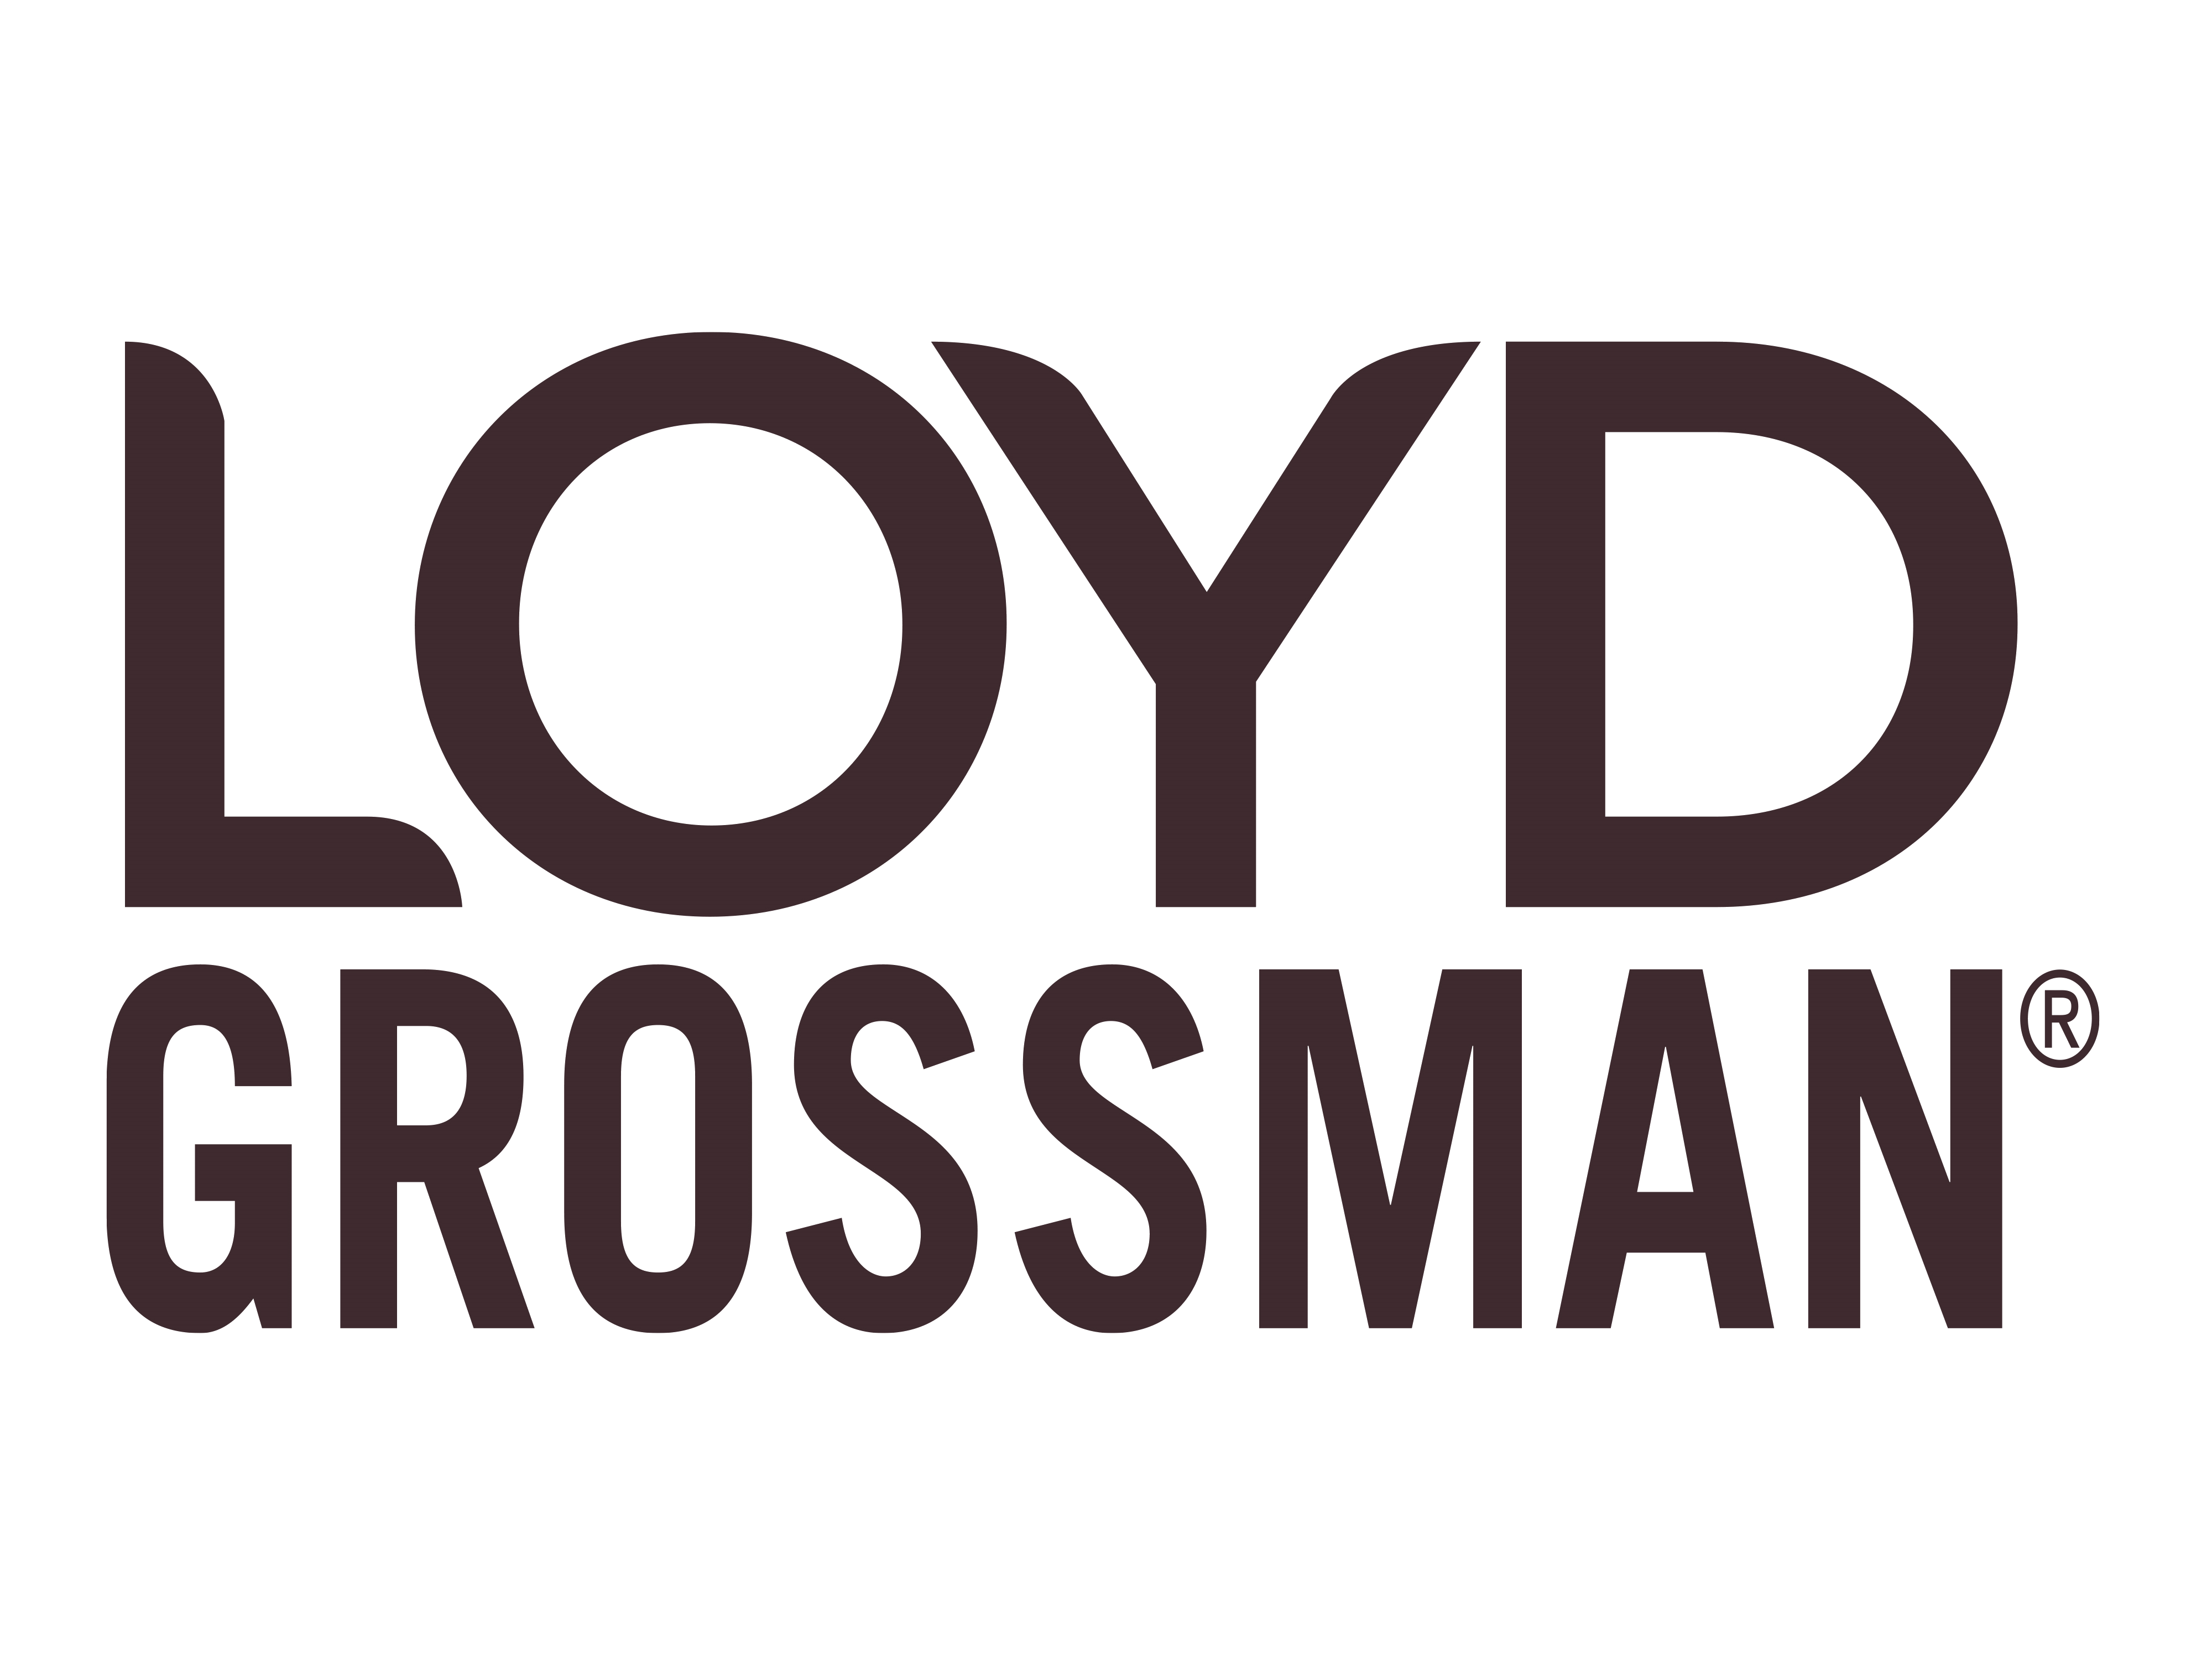 PNG: Transparent Background
© 2019, Loyd Grossman.
All Rights Reserved. Used under licence.